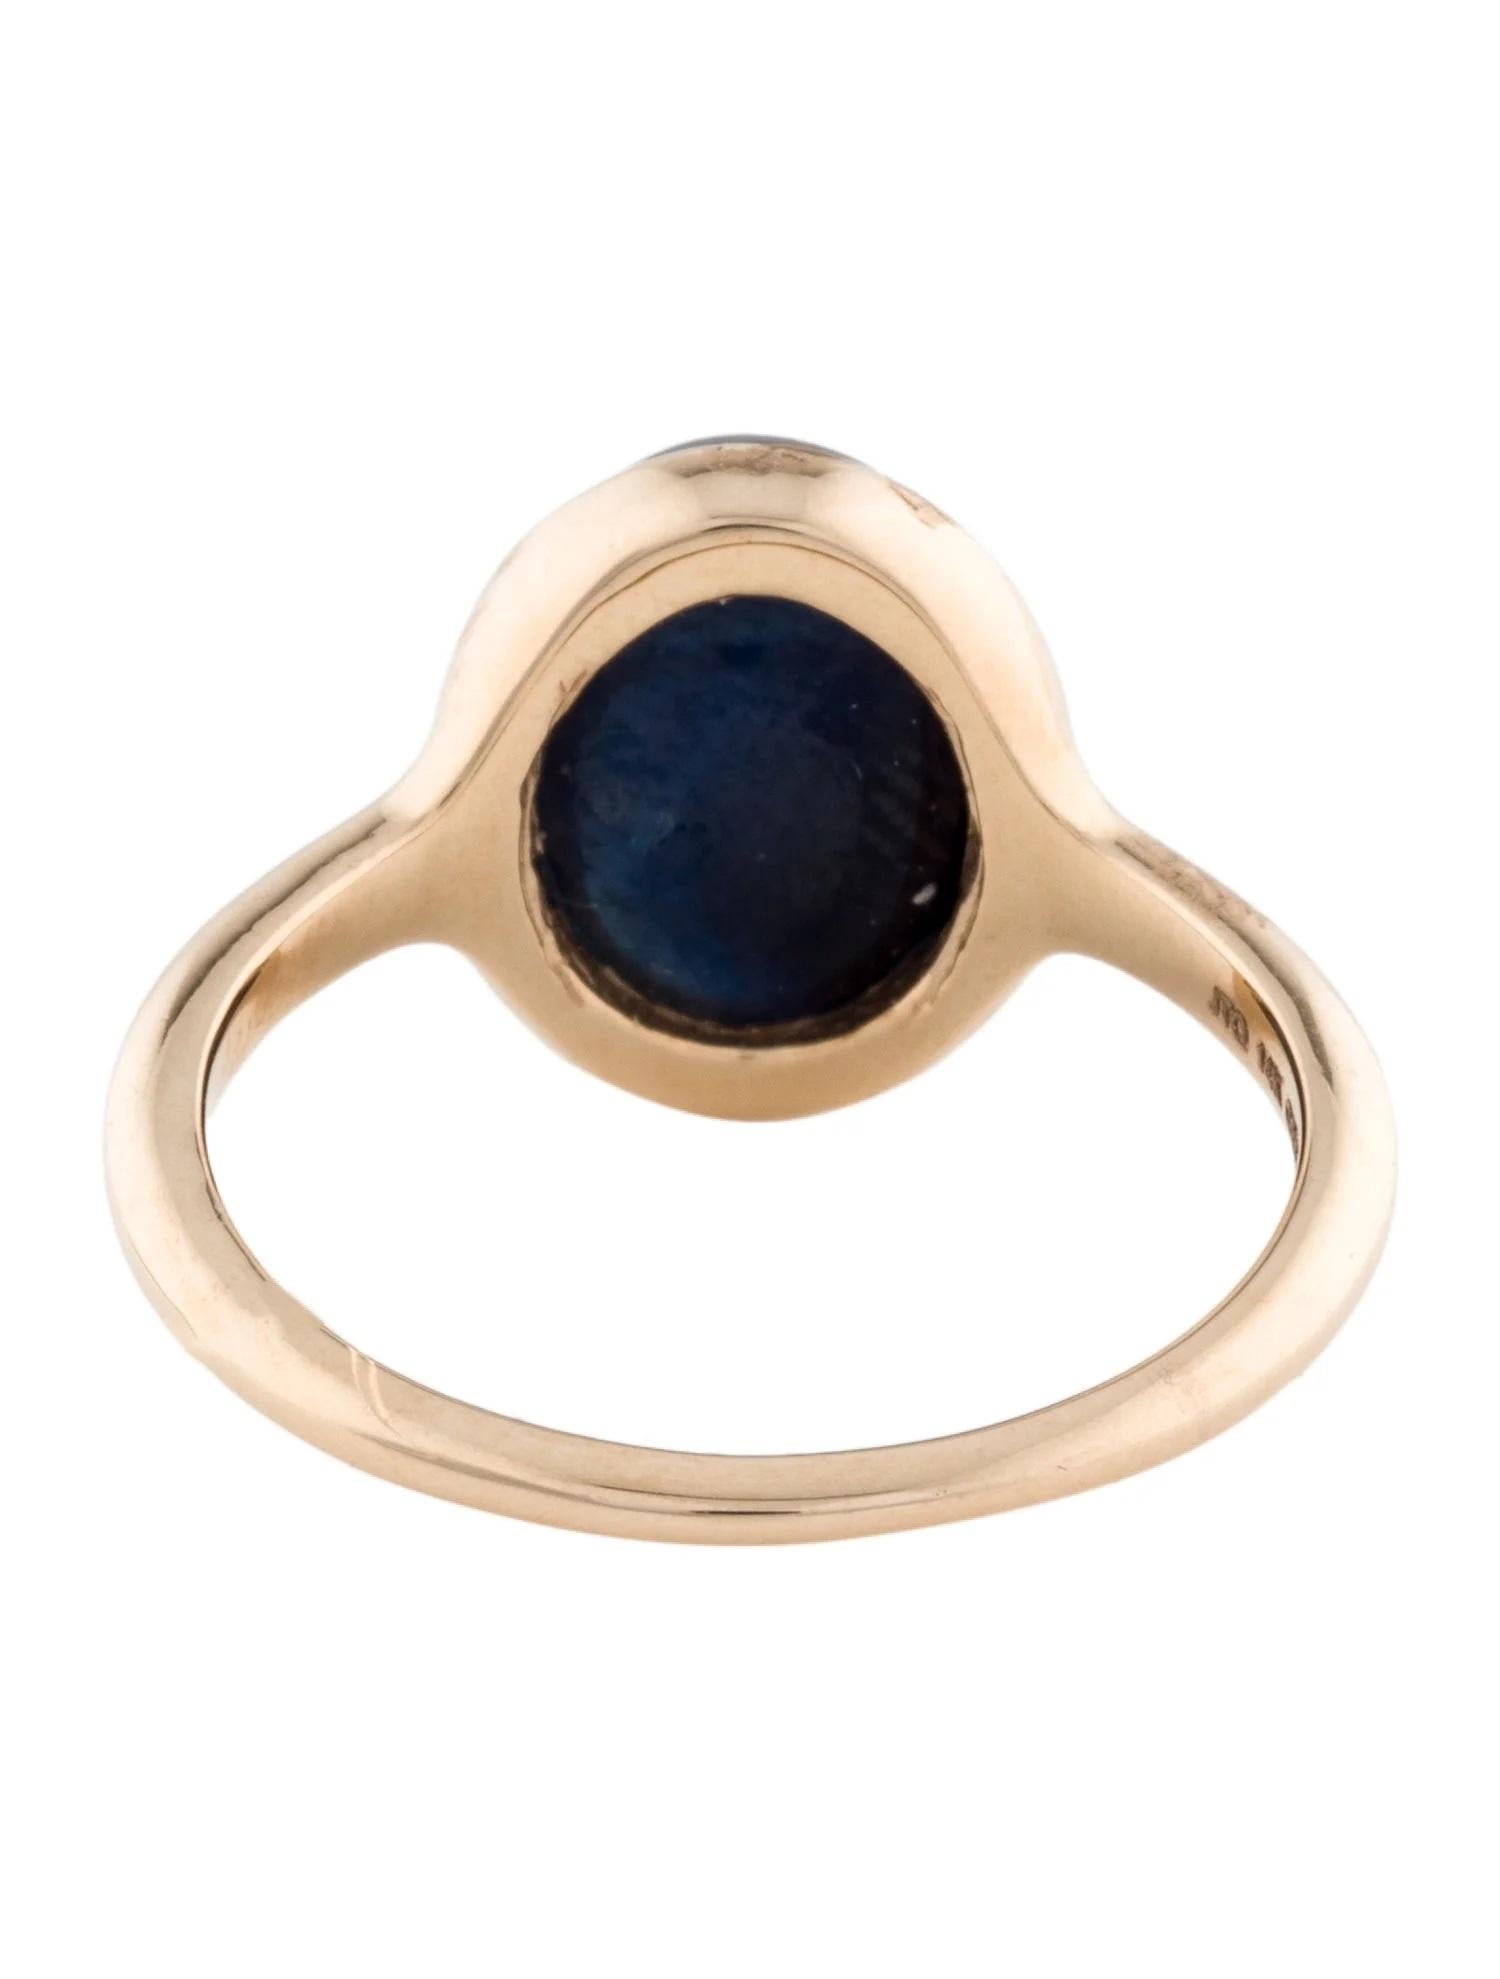 Oval Cut 14K Sapphire Cocktail Ring  7.00ct Oval Cabochon Sapphire  Yellow Gold  Size  For Sale